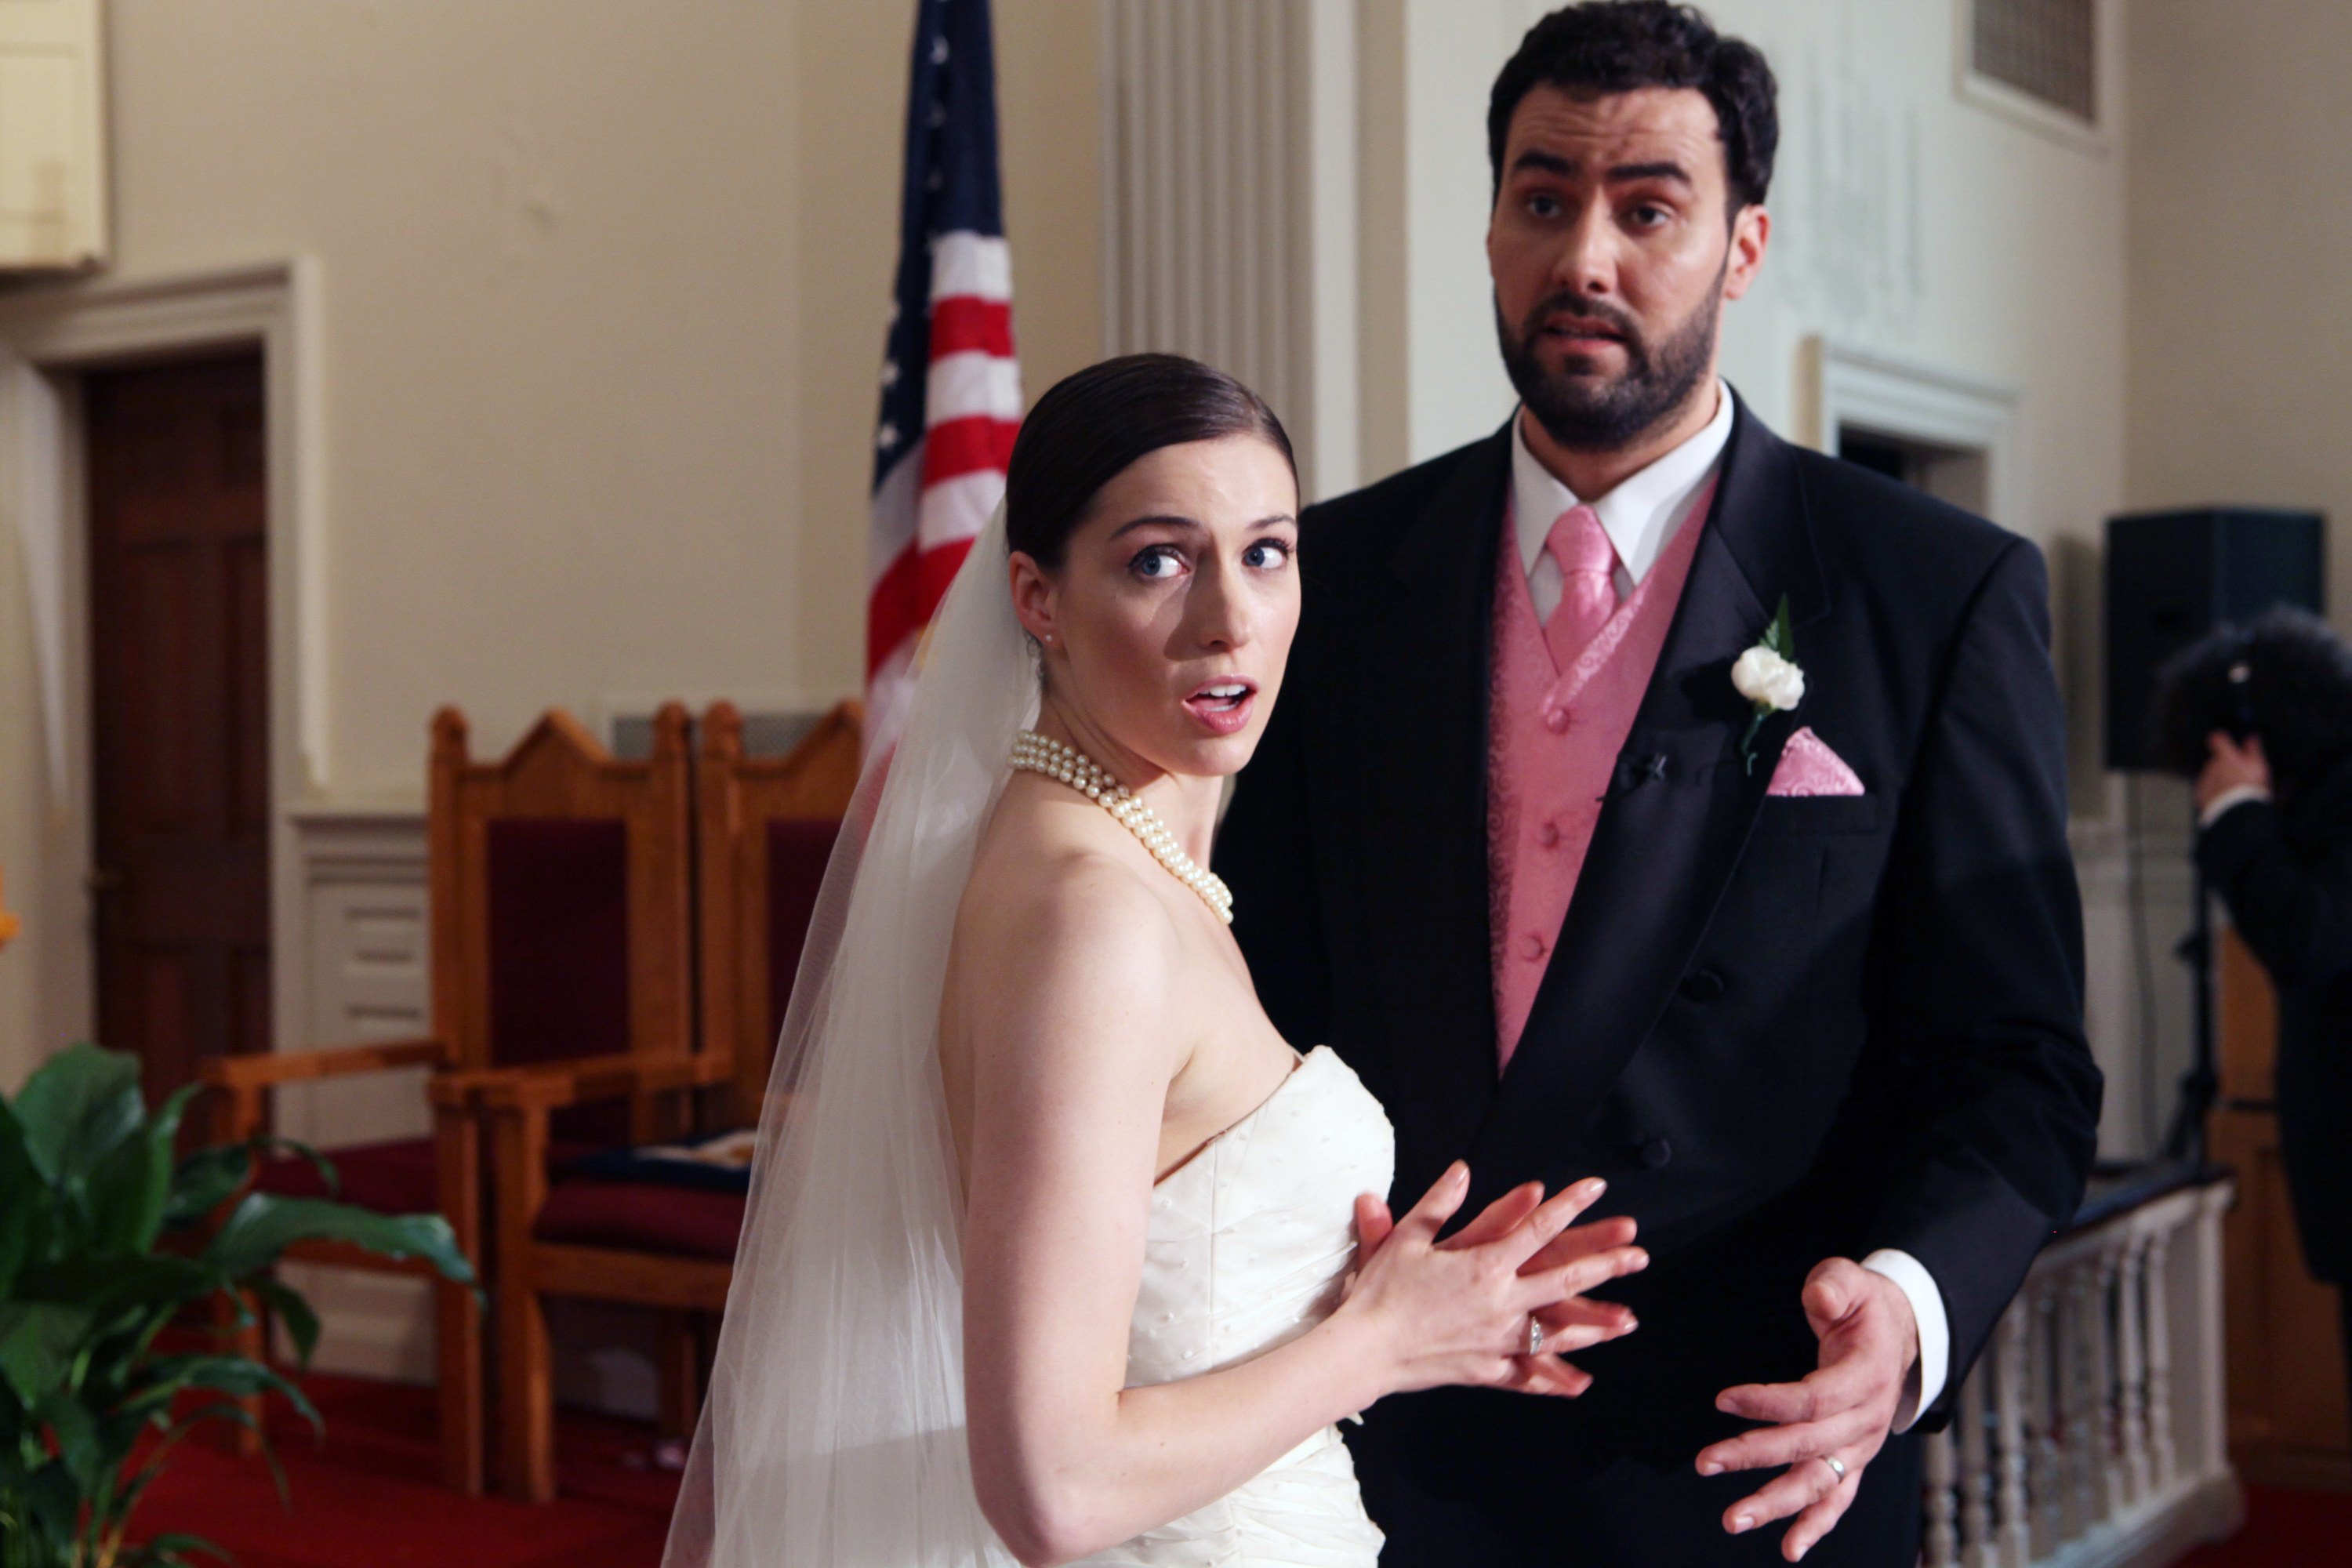 Alison Fyhrie and Philip Quinaz look shocked at a wedding in &quot;breakup at a wedding&quot;